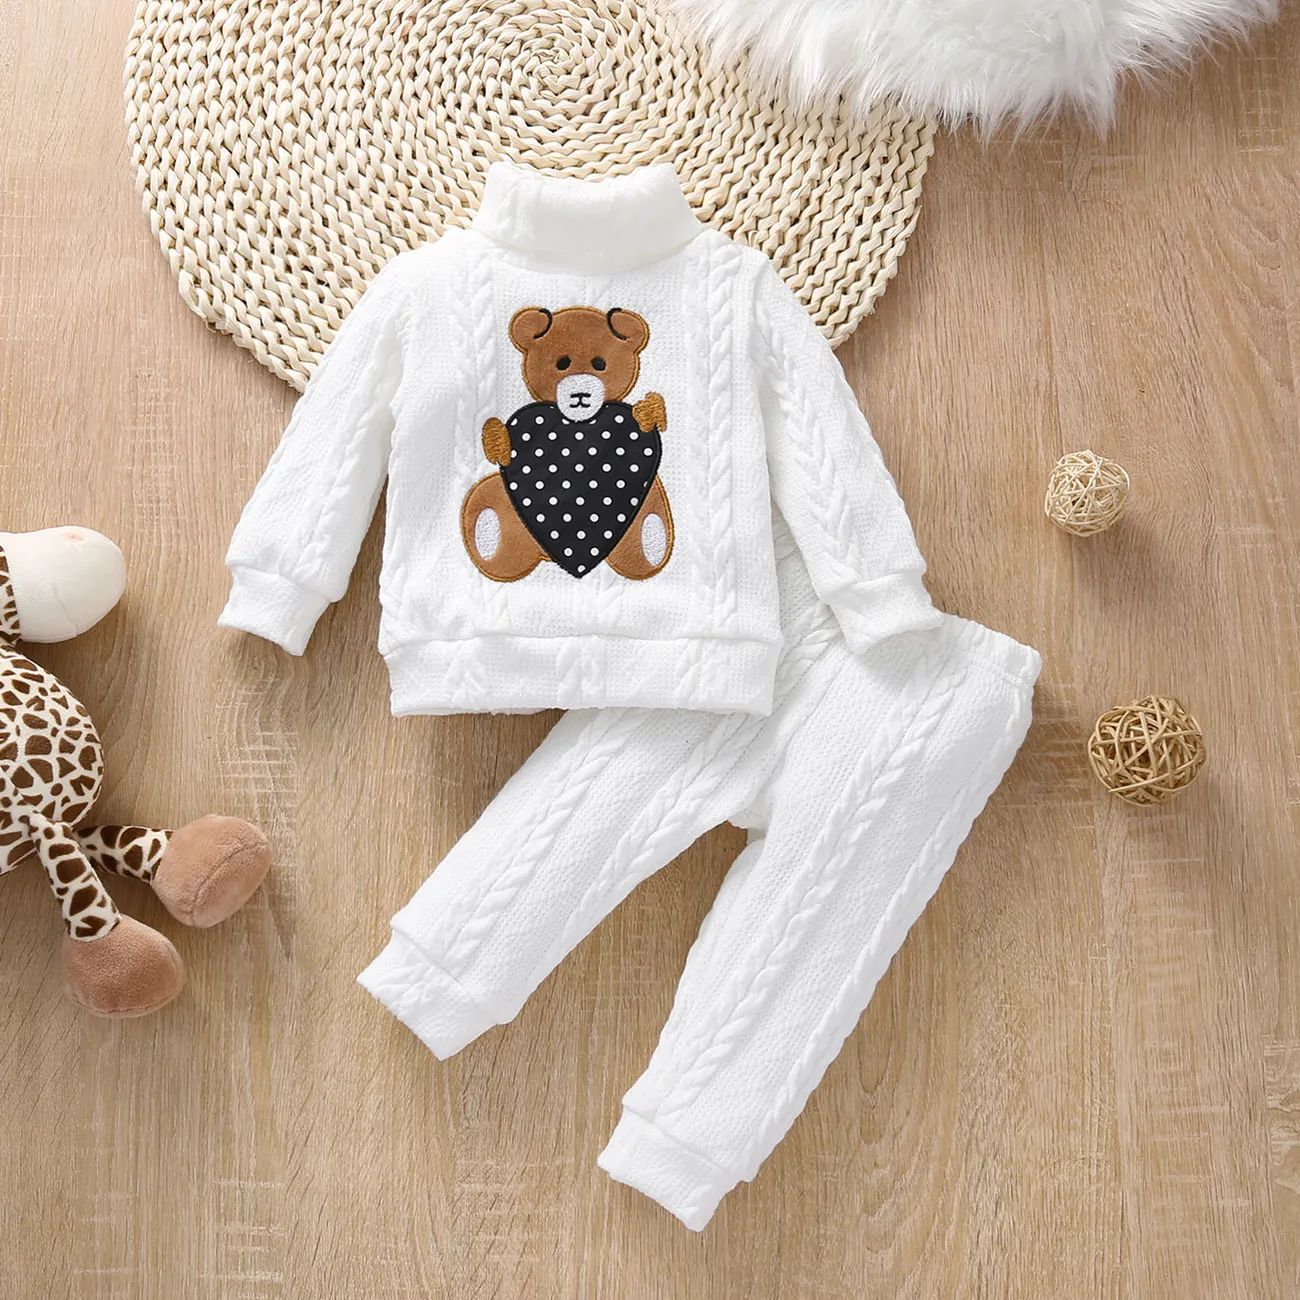 2pcs Teddy and Heart Applique Knitted Turtleneck Long-sleeve White Baby Set White big image 1